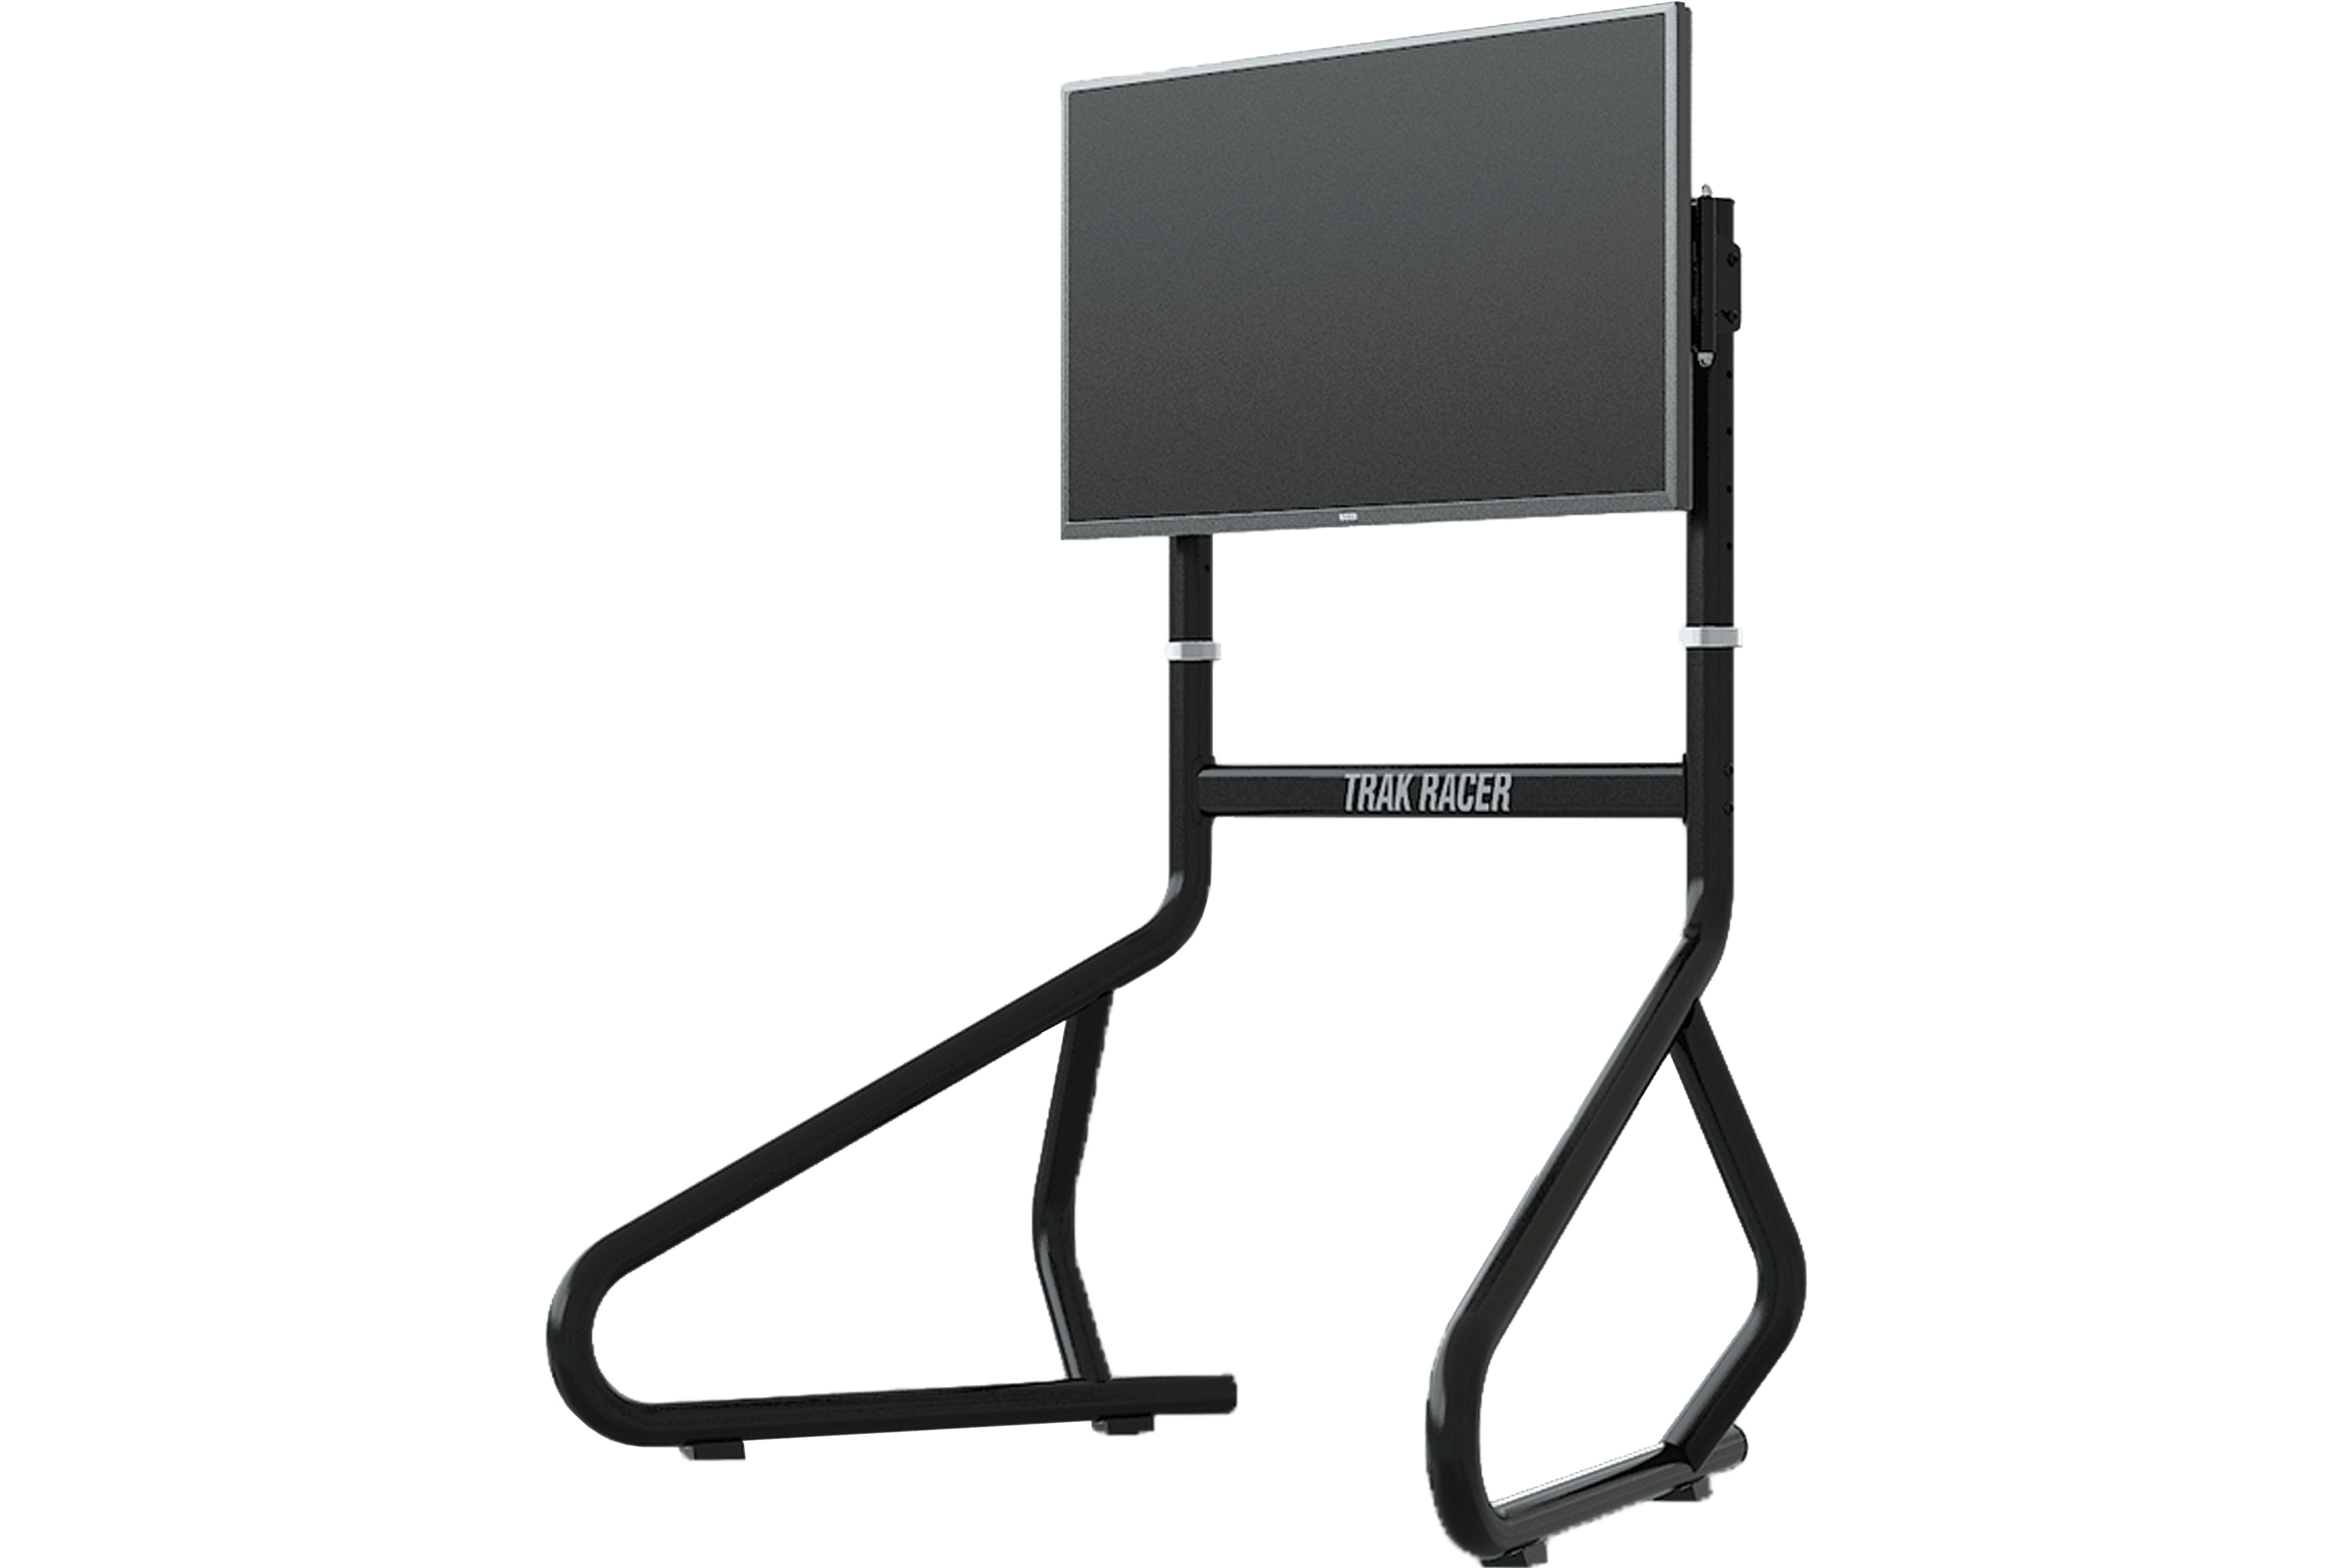 Freestanding Single Monitor Stand - up to 80" Display